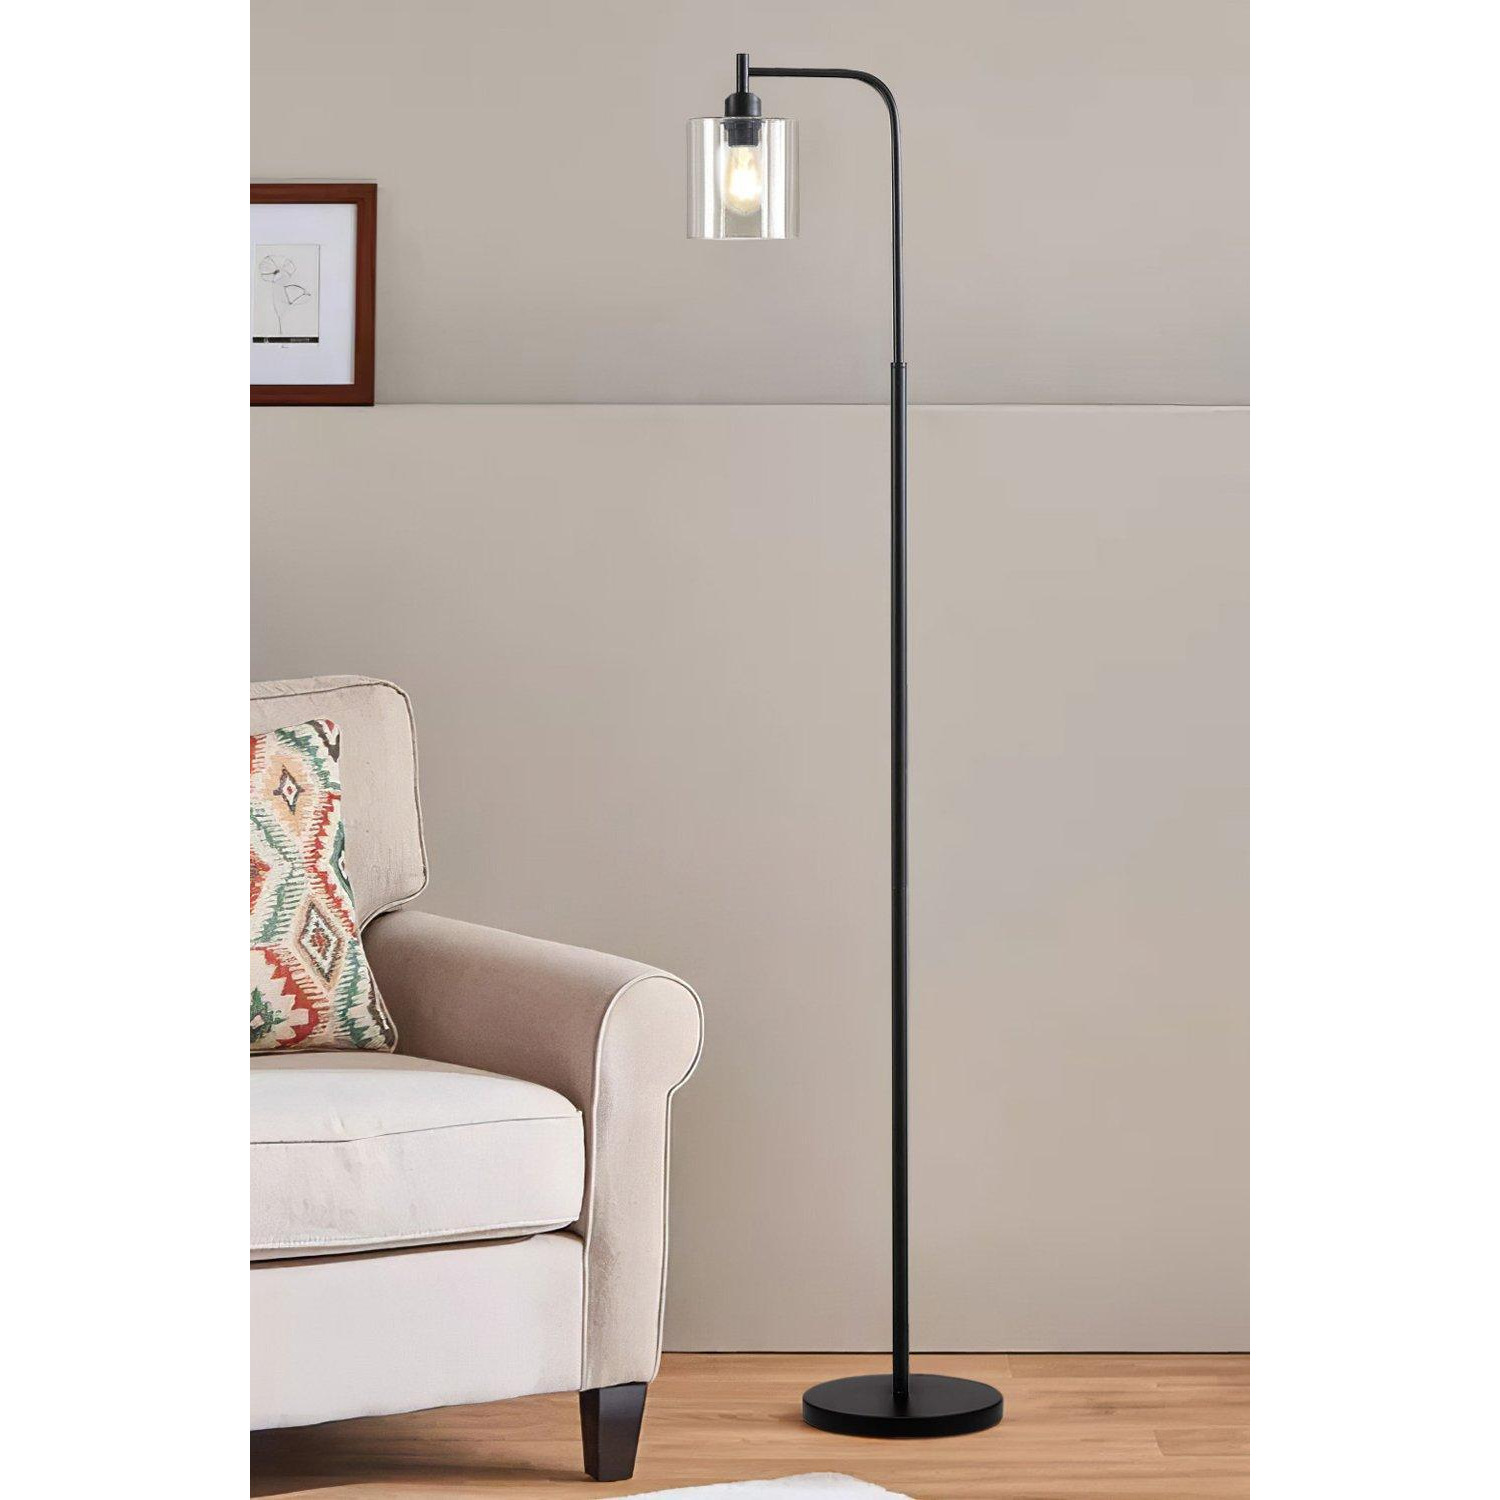 Minimalist Floor Lamp with Glass Lampshade - image 1